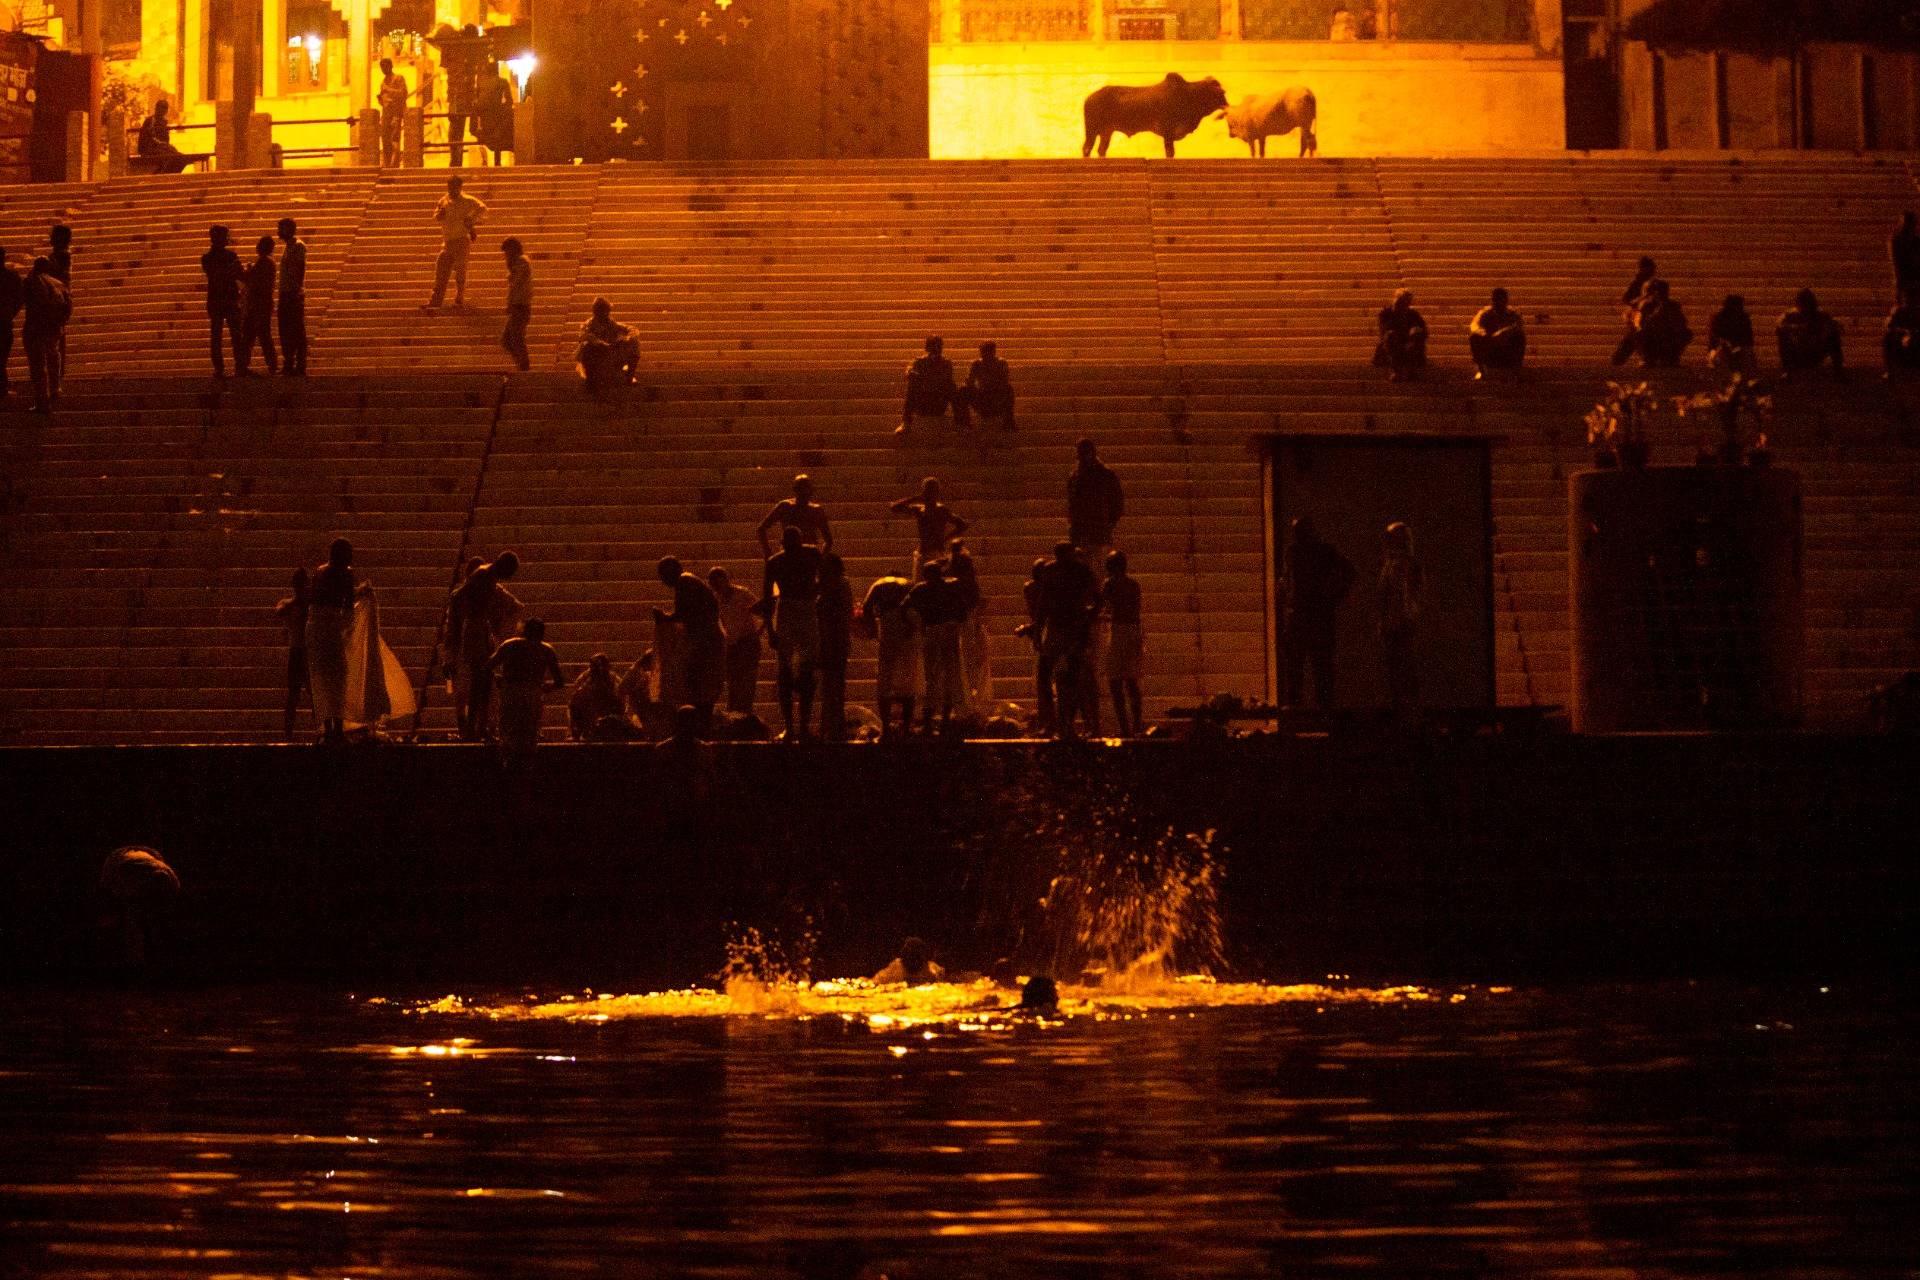 Indian Tourists take a spiritual dip in the Ganges.